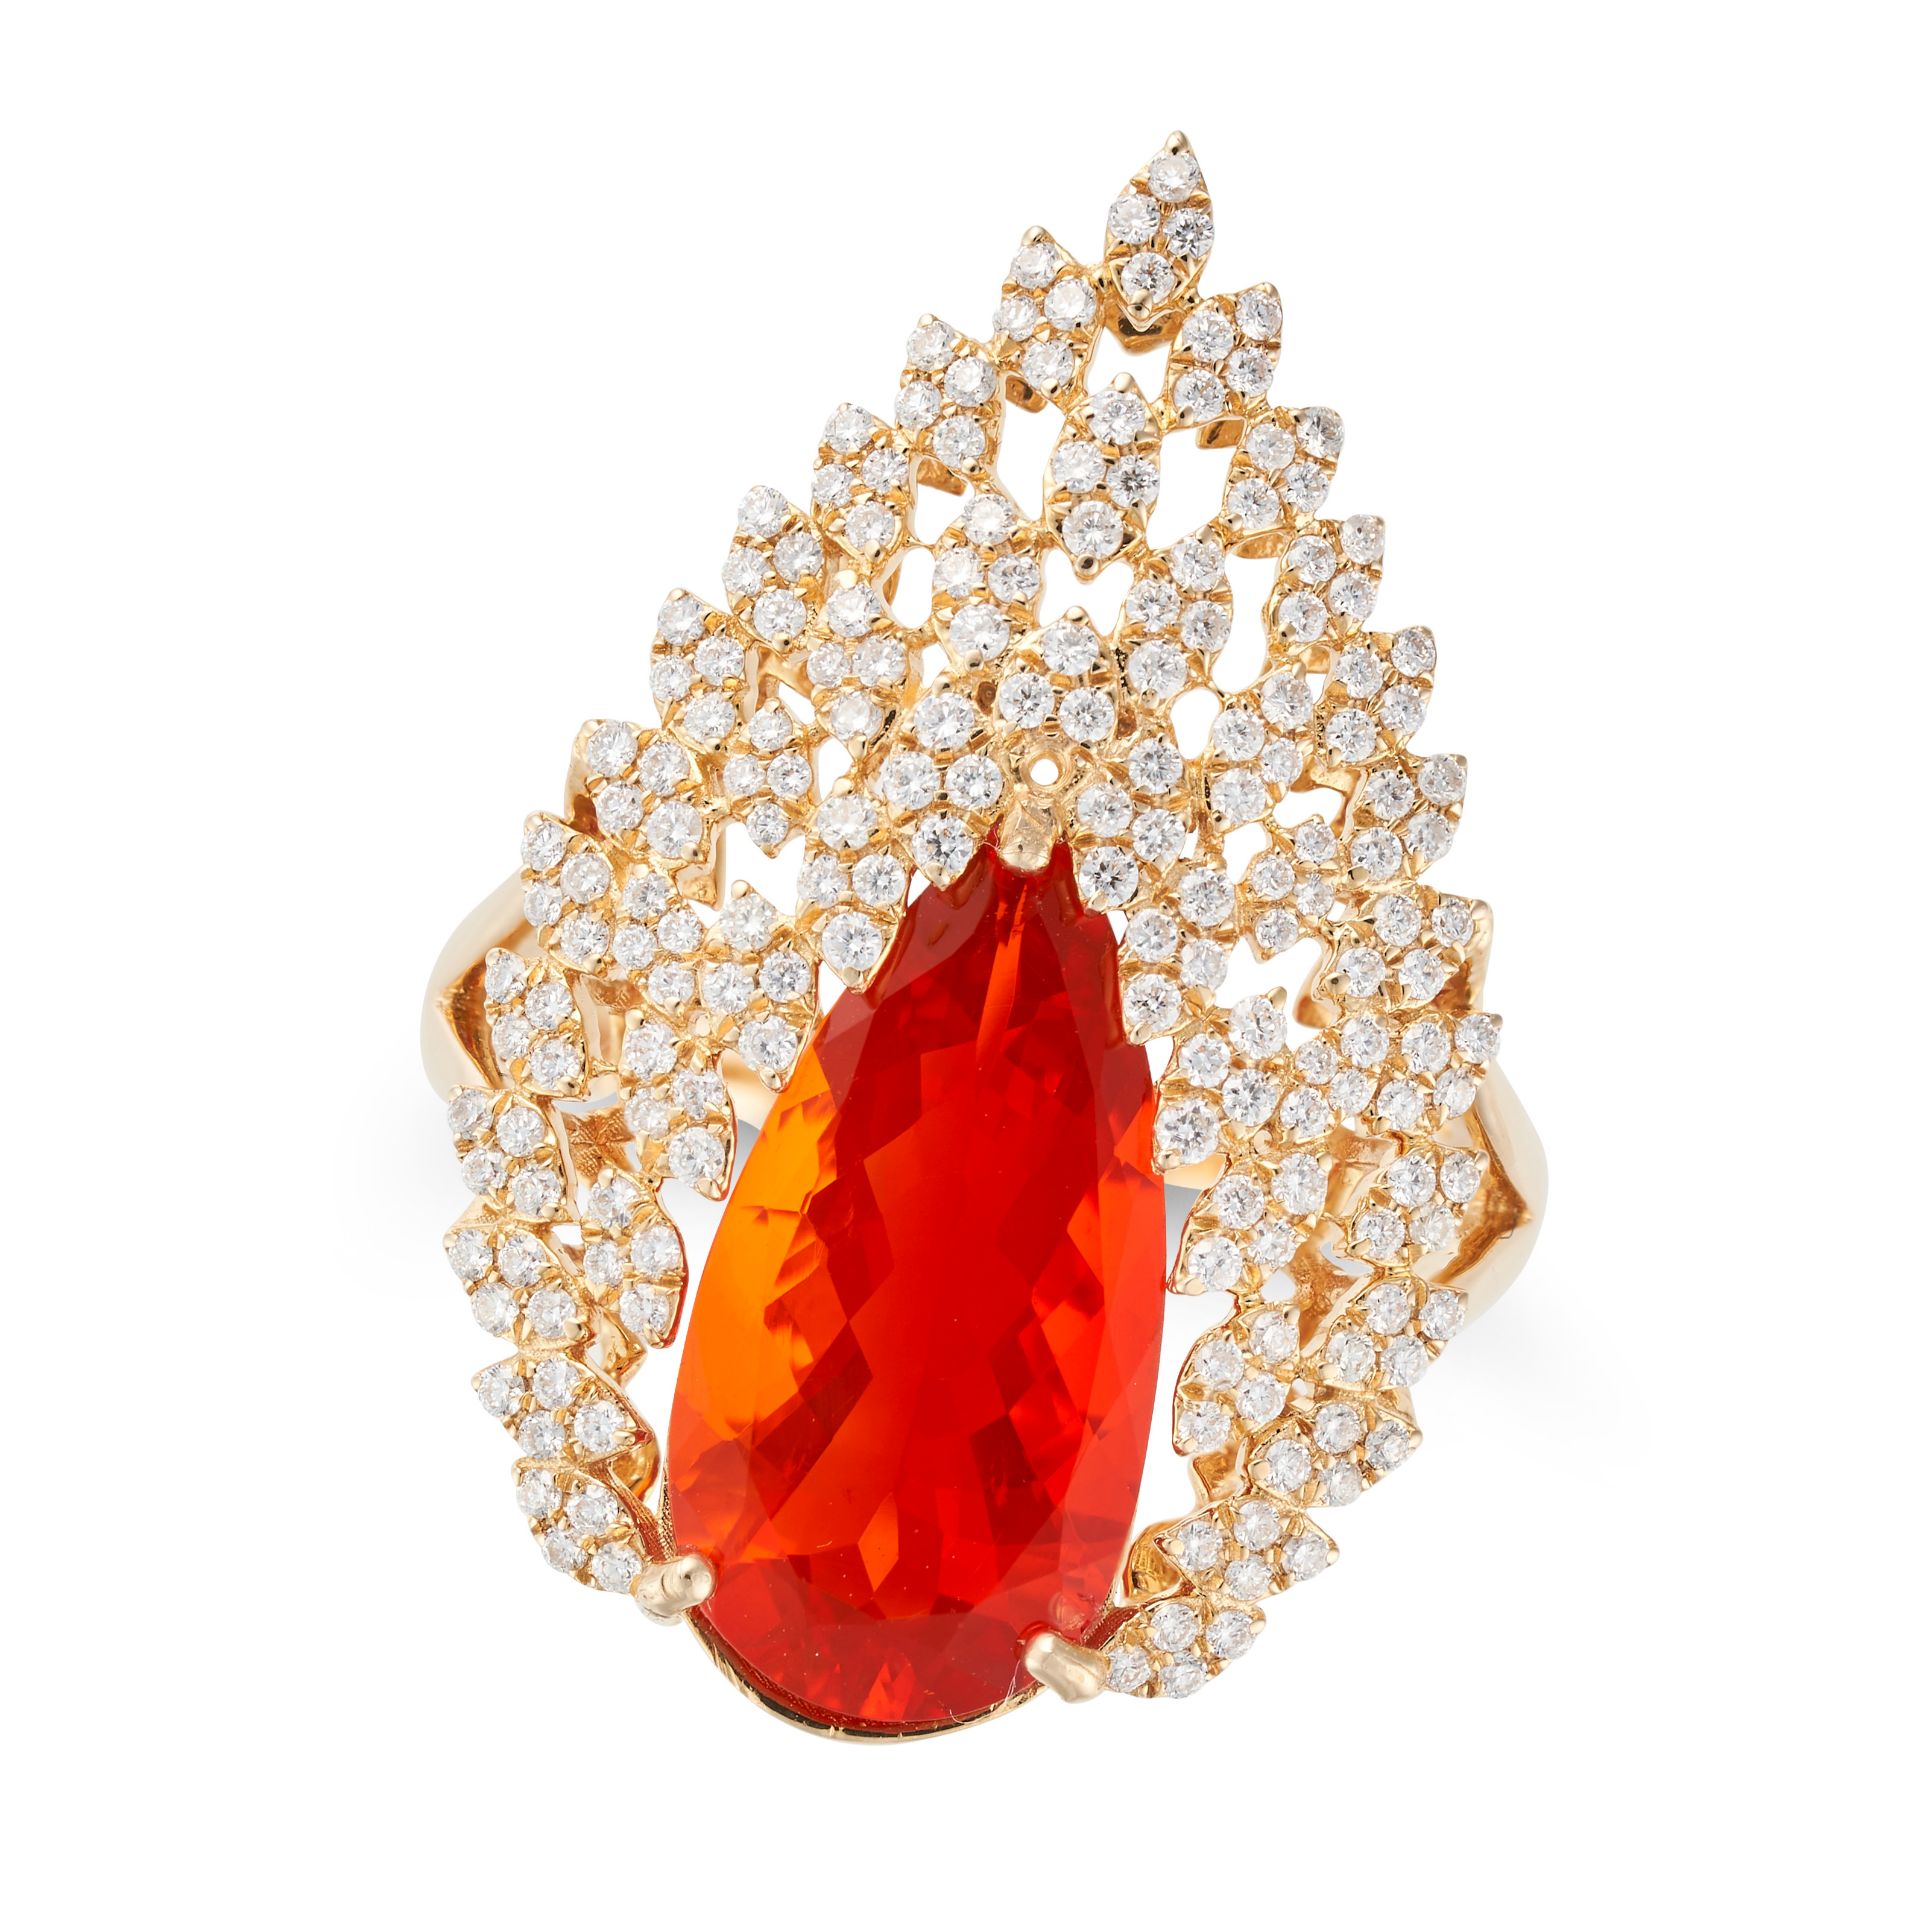 A FIRE OPAL AND DIAMOND DRESS RING set with a pear cut fire opal of 3.24 carats accented by round...